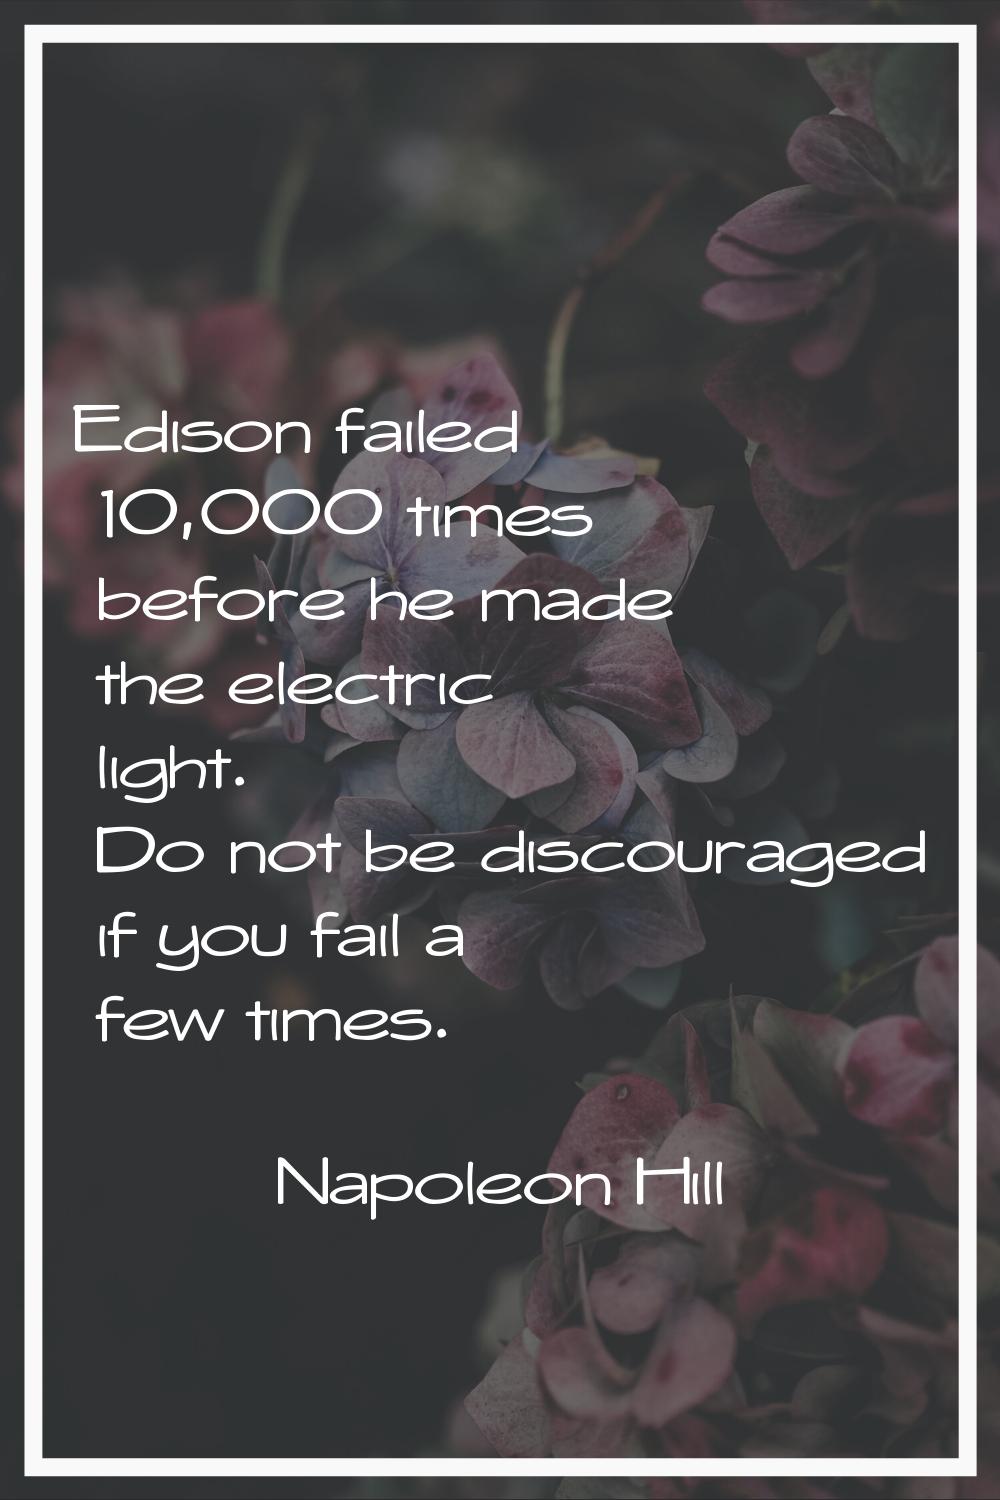 Edison failed 10,000 times before he made the electric light. Do not be discouraged if you fail a f